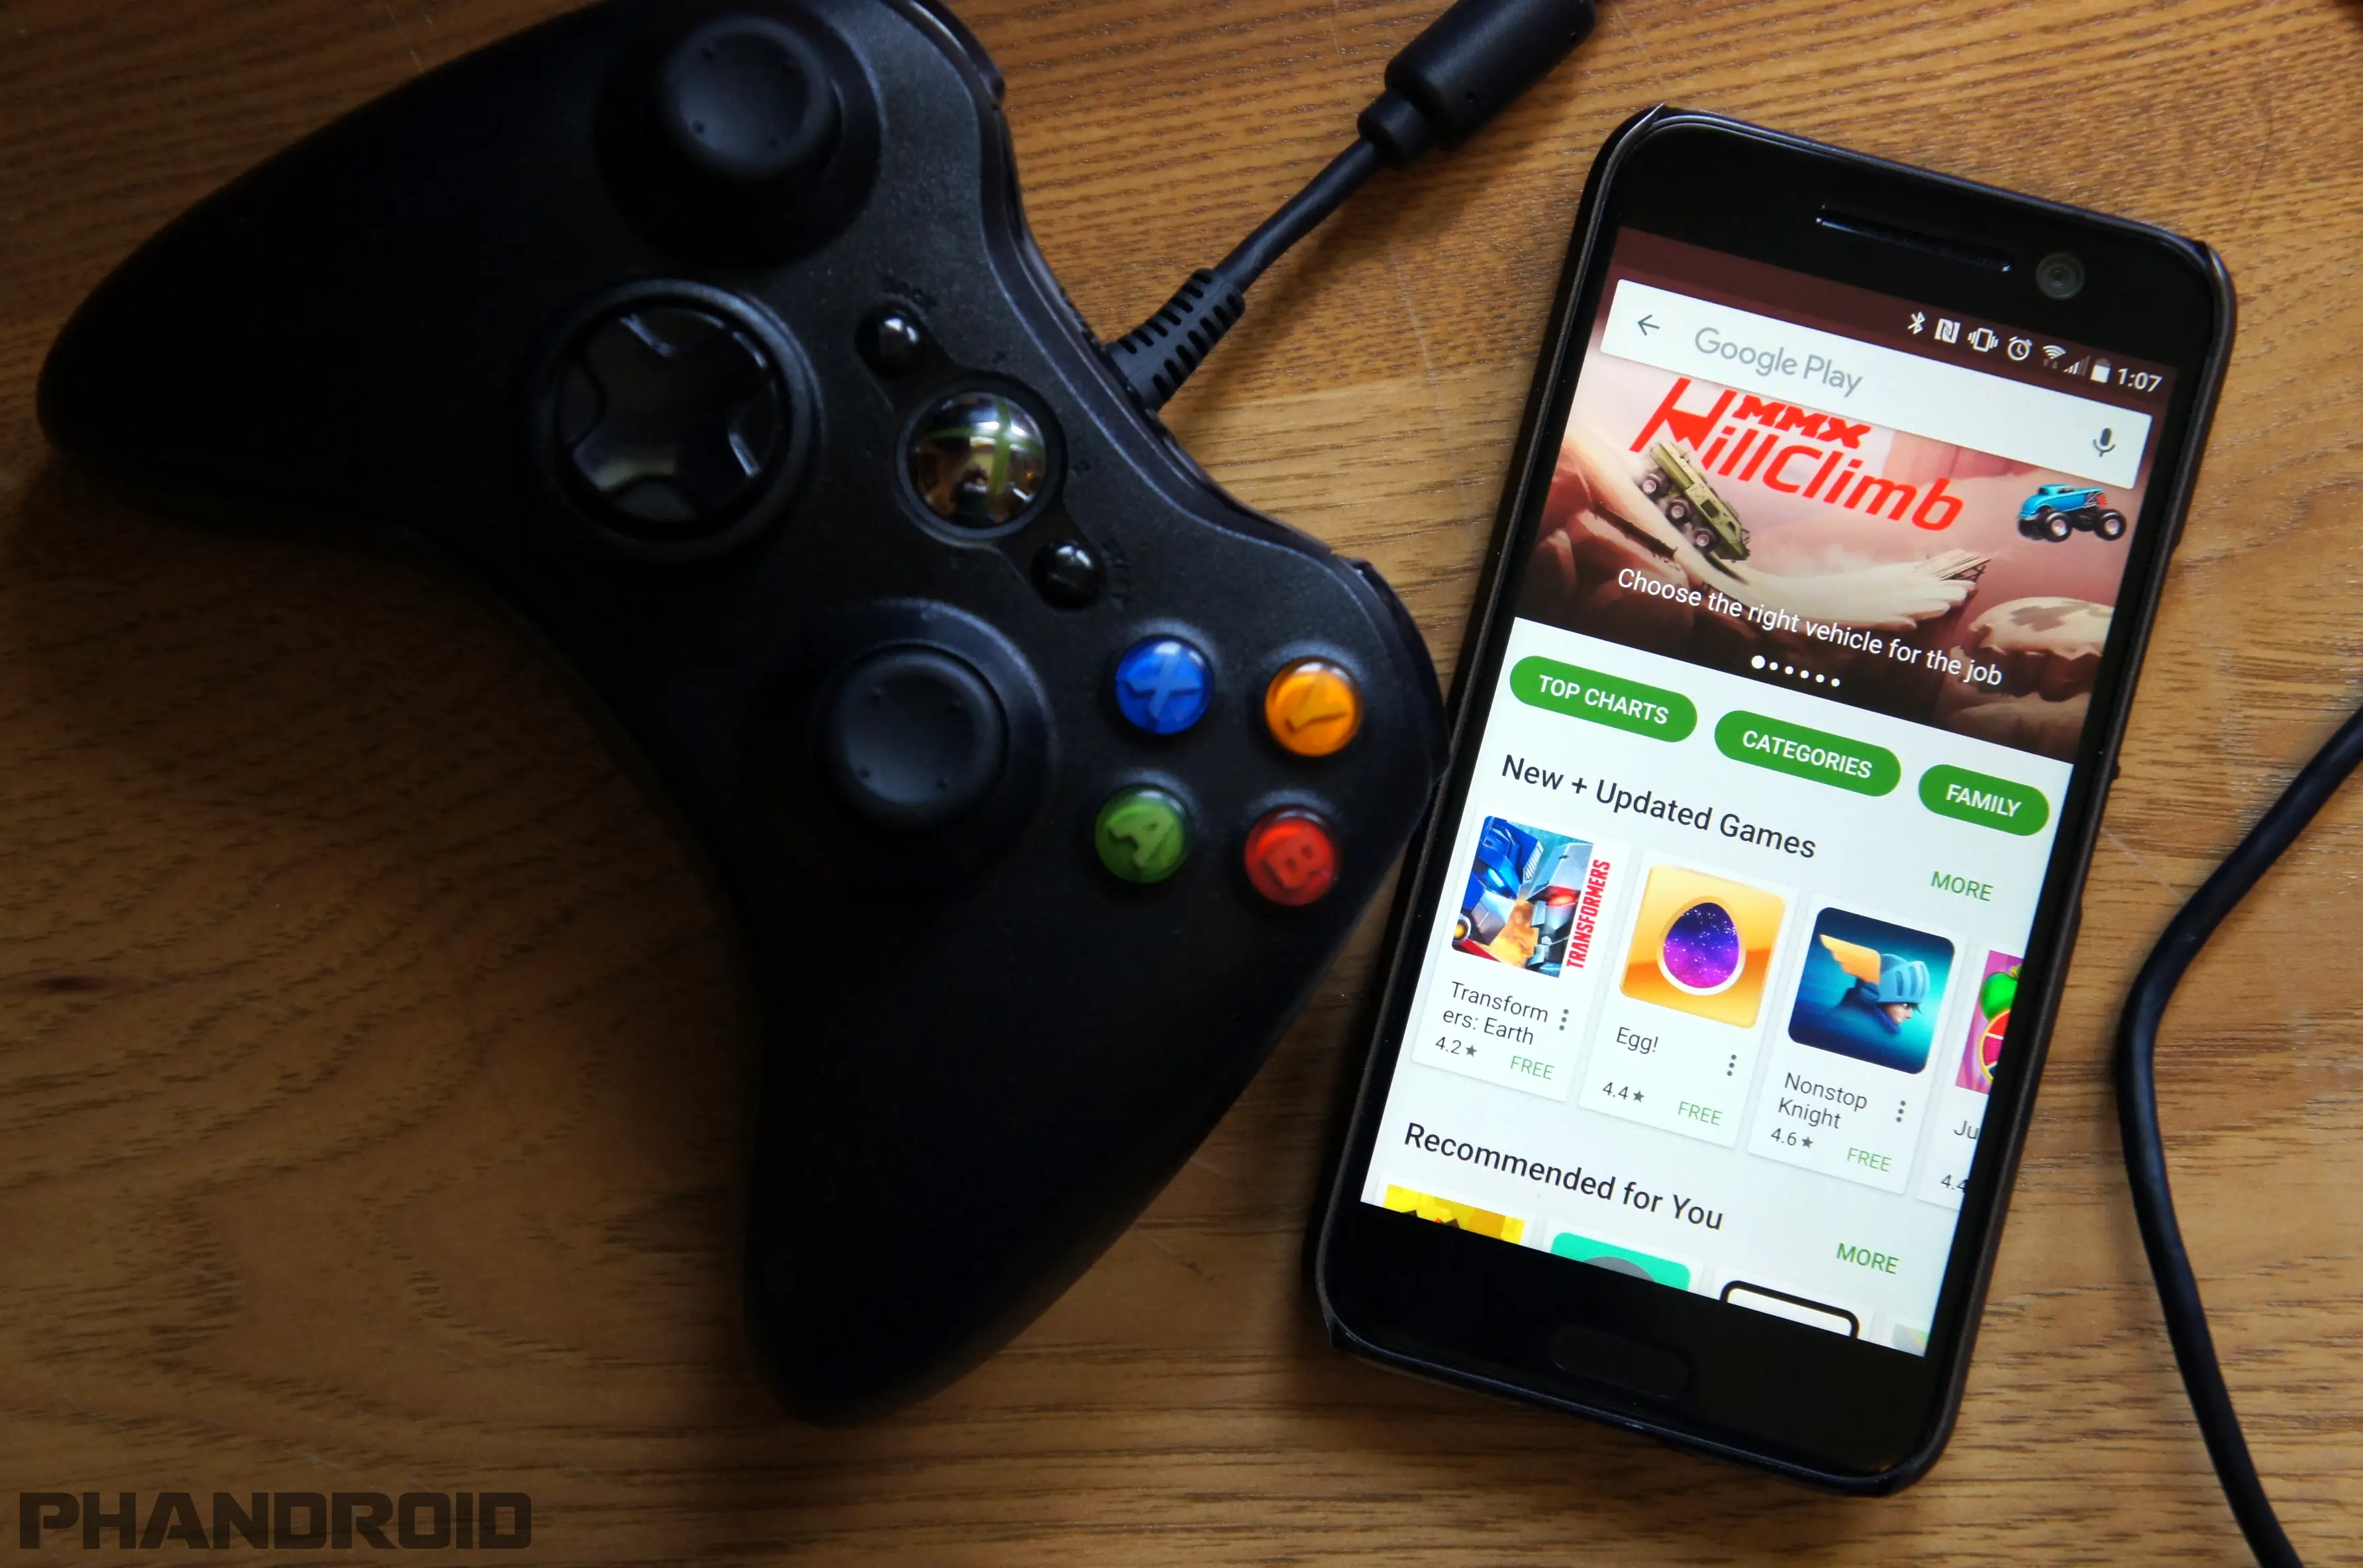 Top 5 Free games for Android